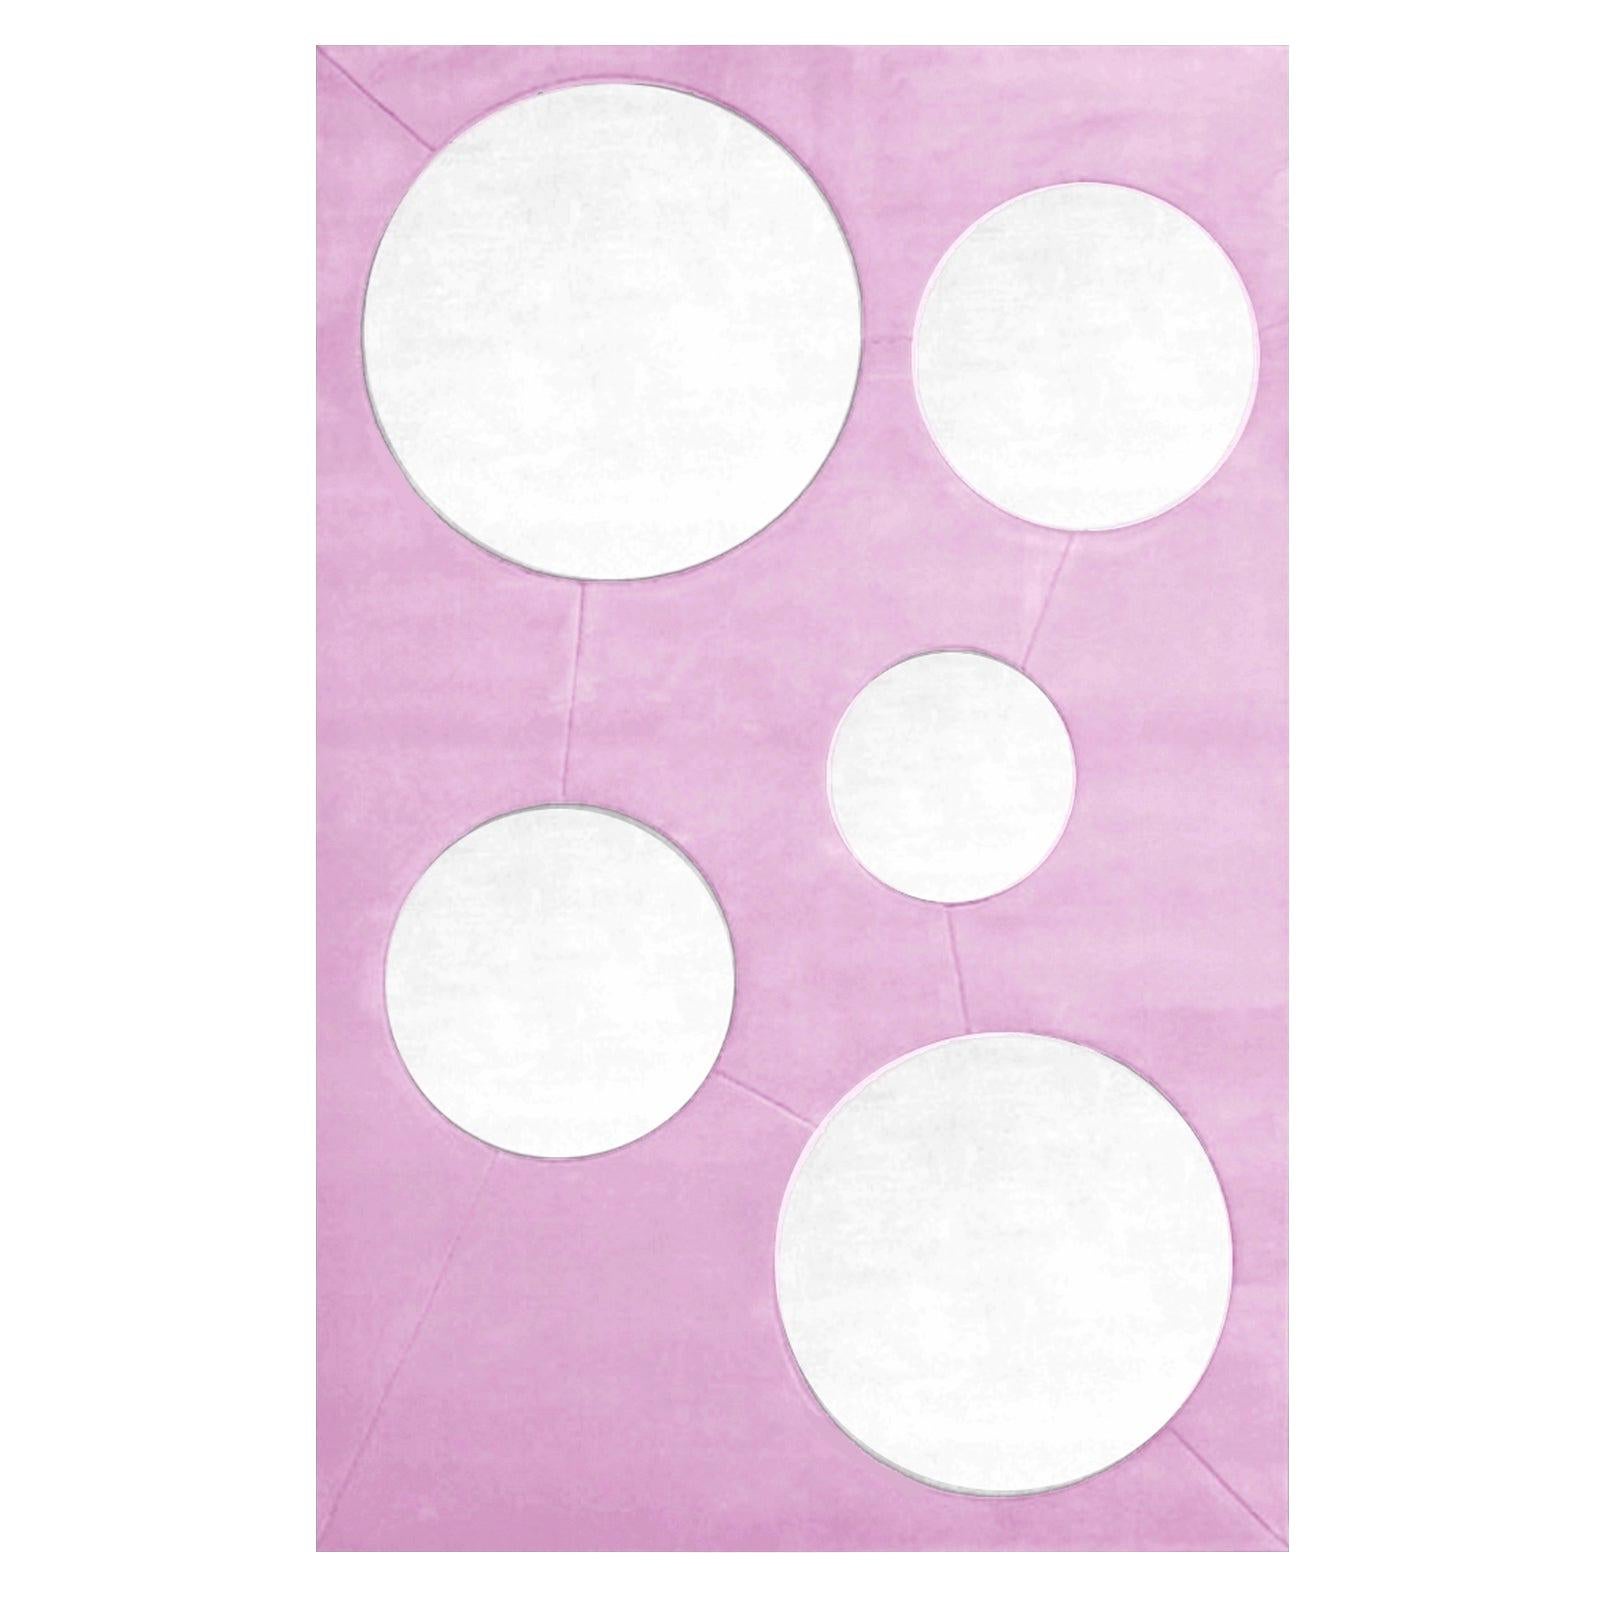 In Stock in Los Angeles, Two Tones Pink and White Rug with Geometric Shapes